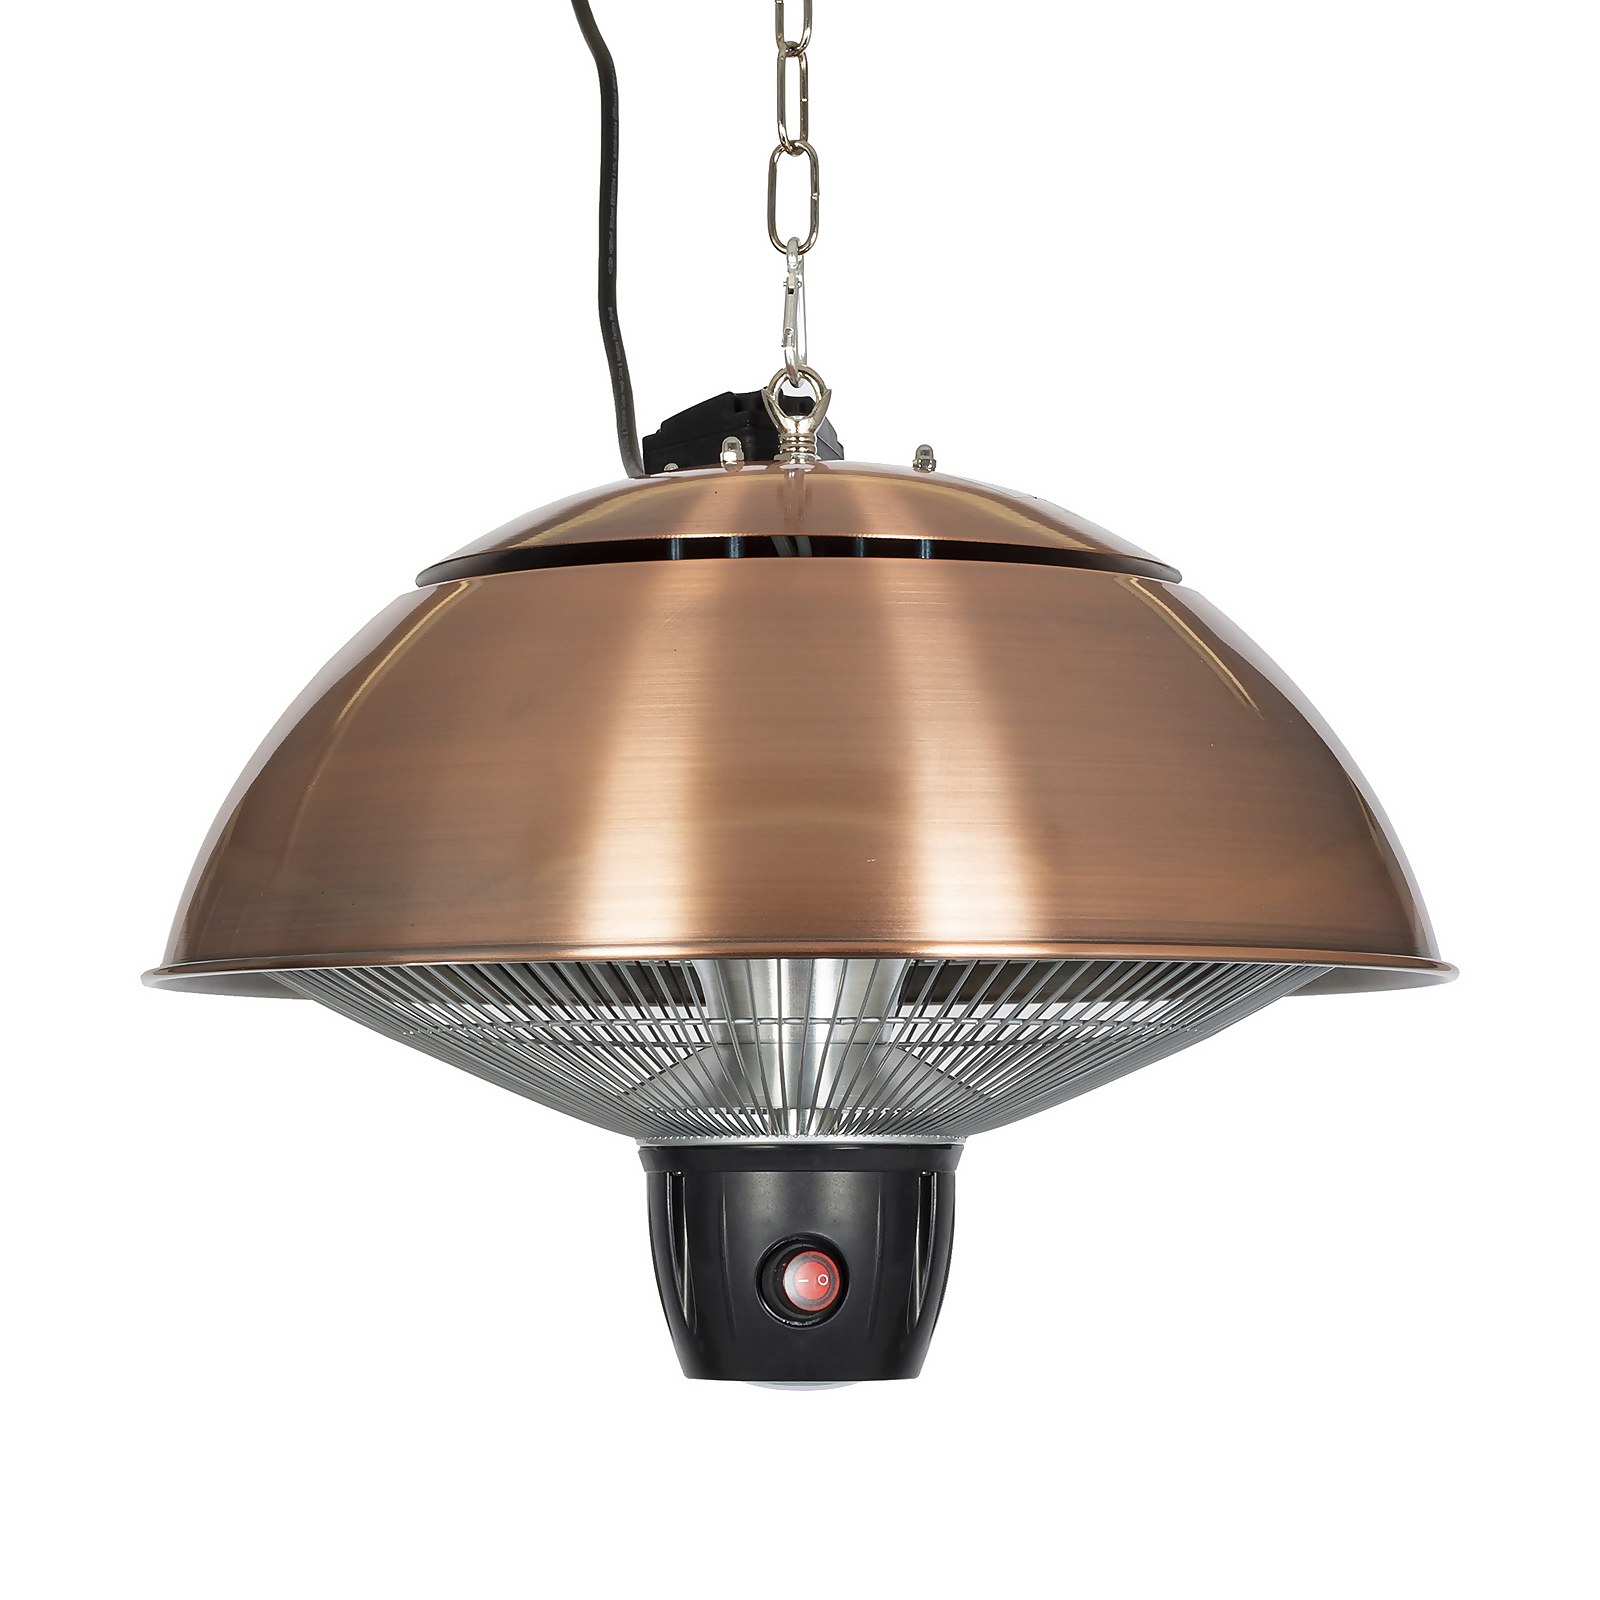 Photo of Copper Electric Hanging Mushroom Heater